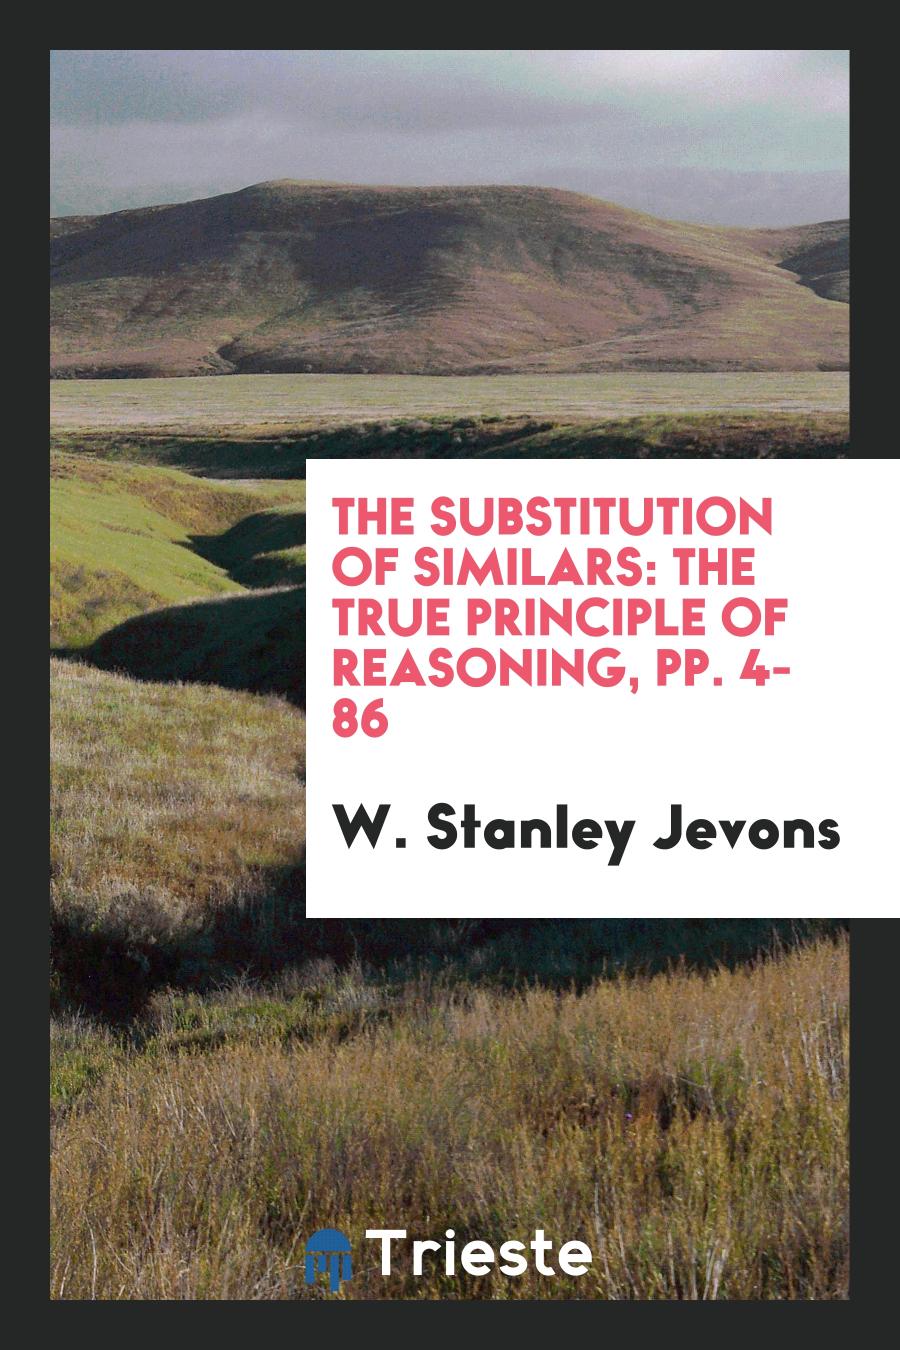 The Substitution of Similars: The True Principle of Reasoning, pp. 4-86